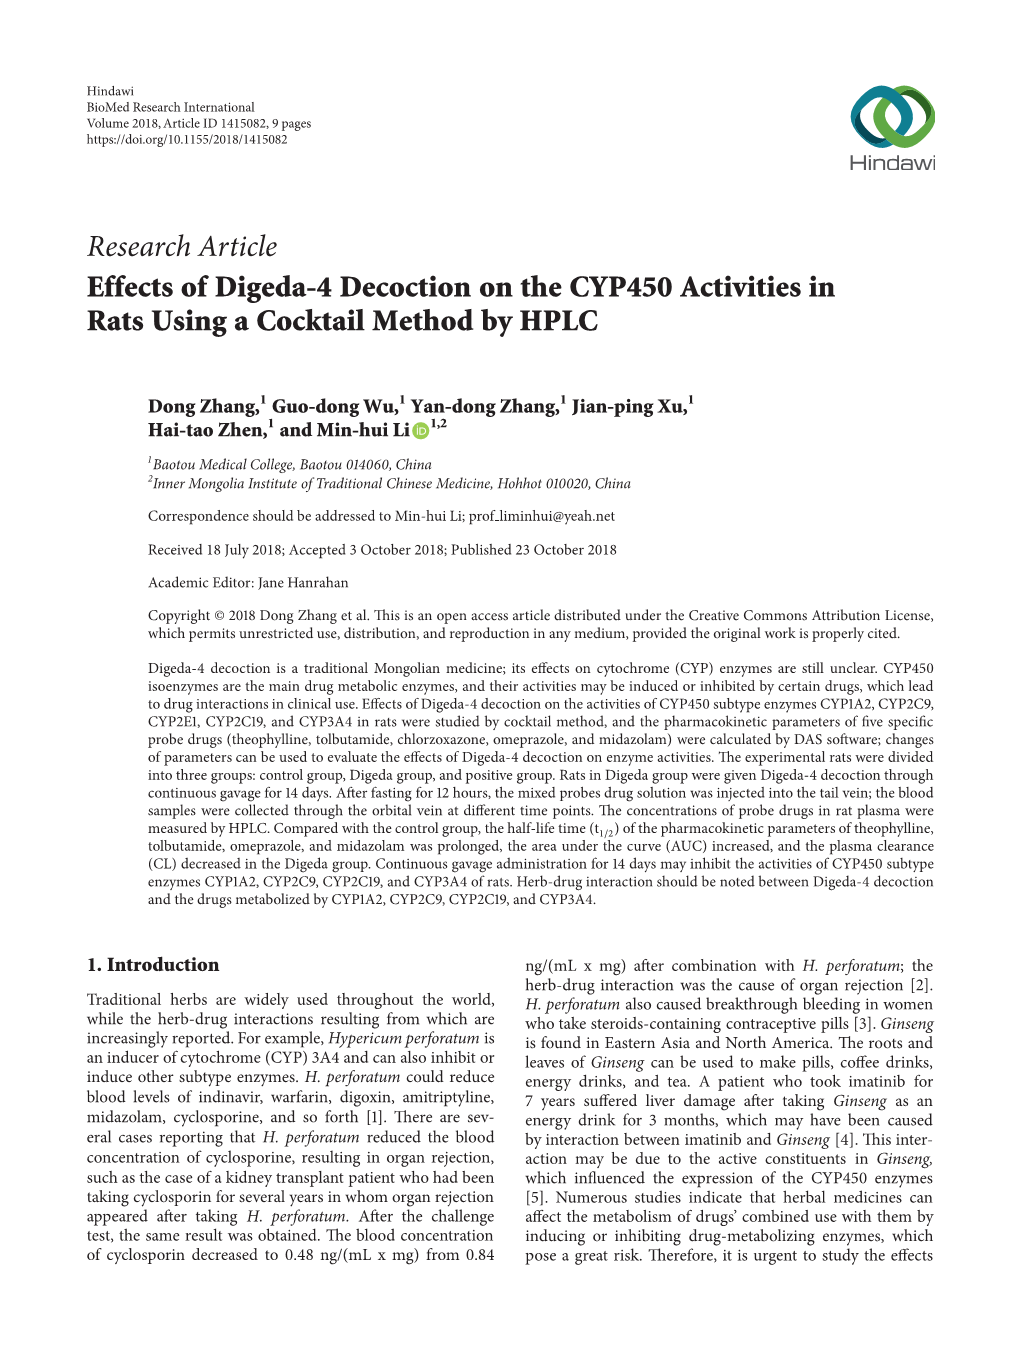 Research Article Effects of Digeda-4 Decoction on the CYP450 Activities in Rats Using a Cocktail Method by HPLC